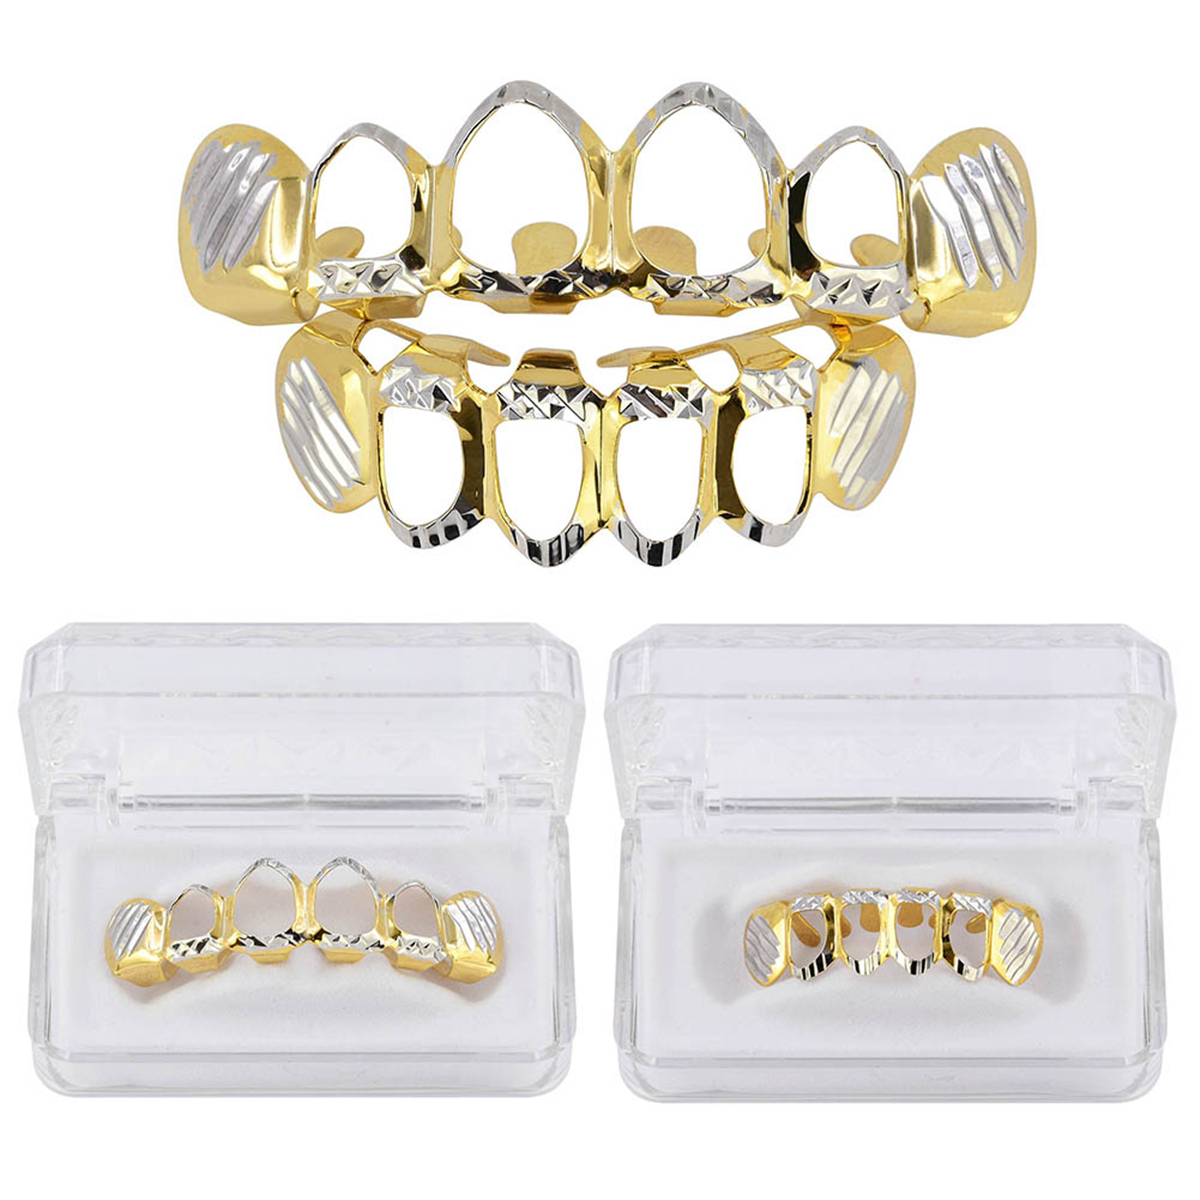 

24k Gold Teeth Grill Plated Mouth Bling Hip Hop Grill Set